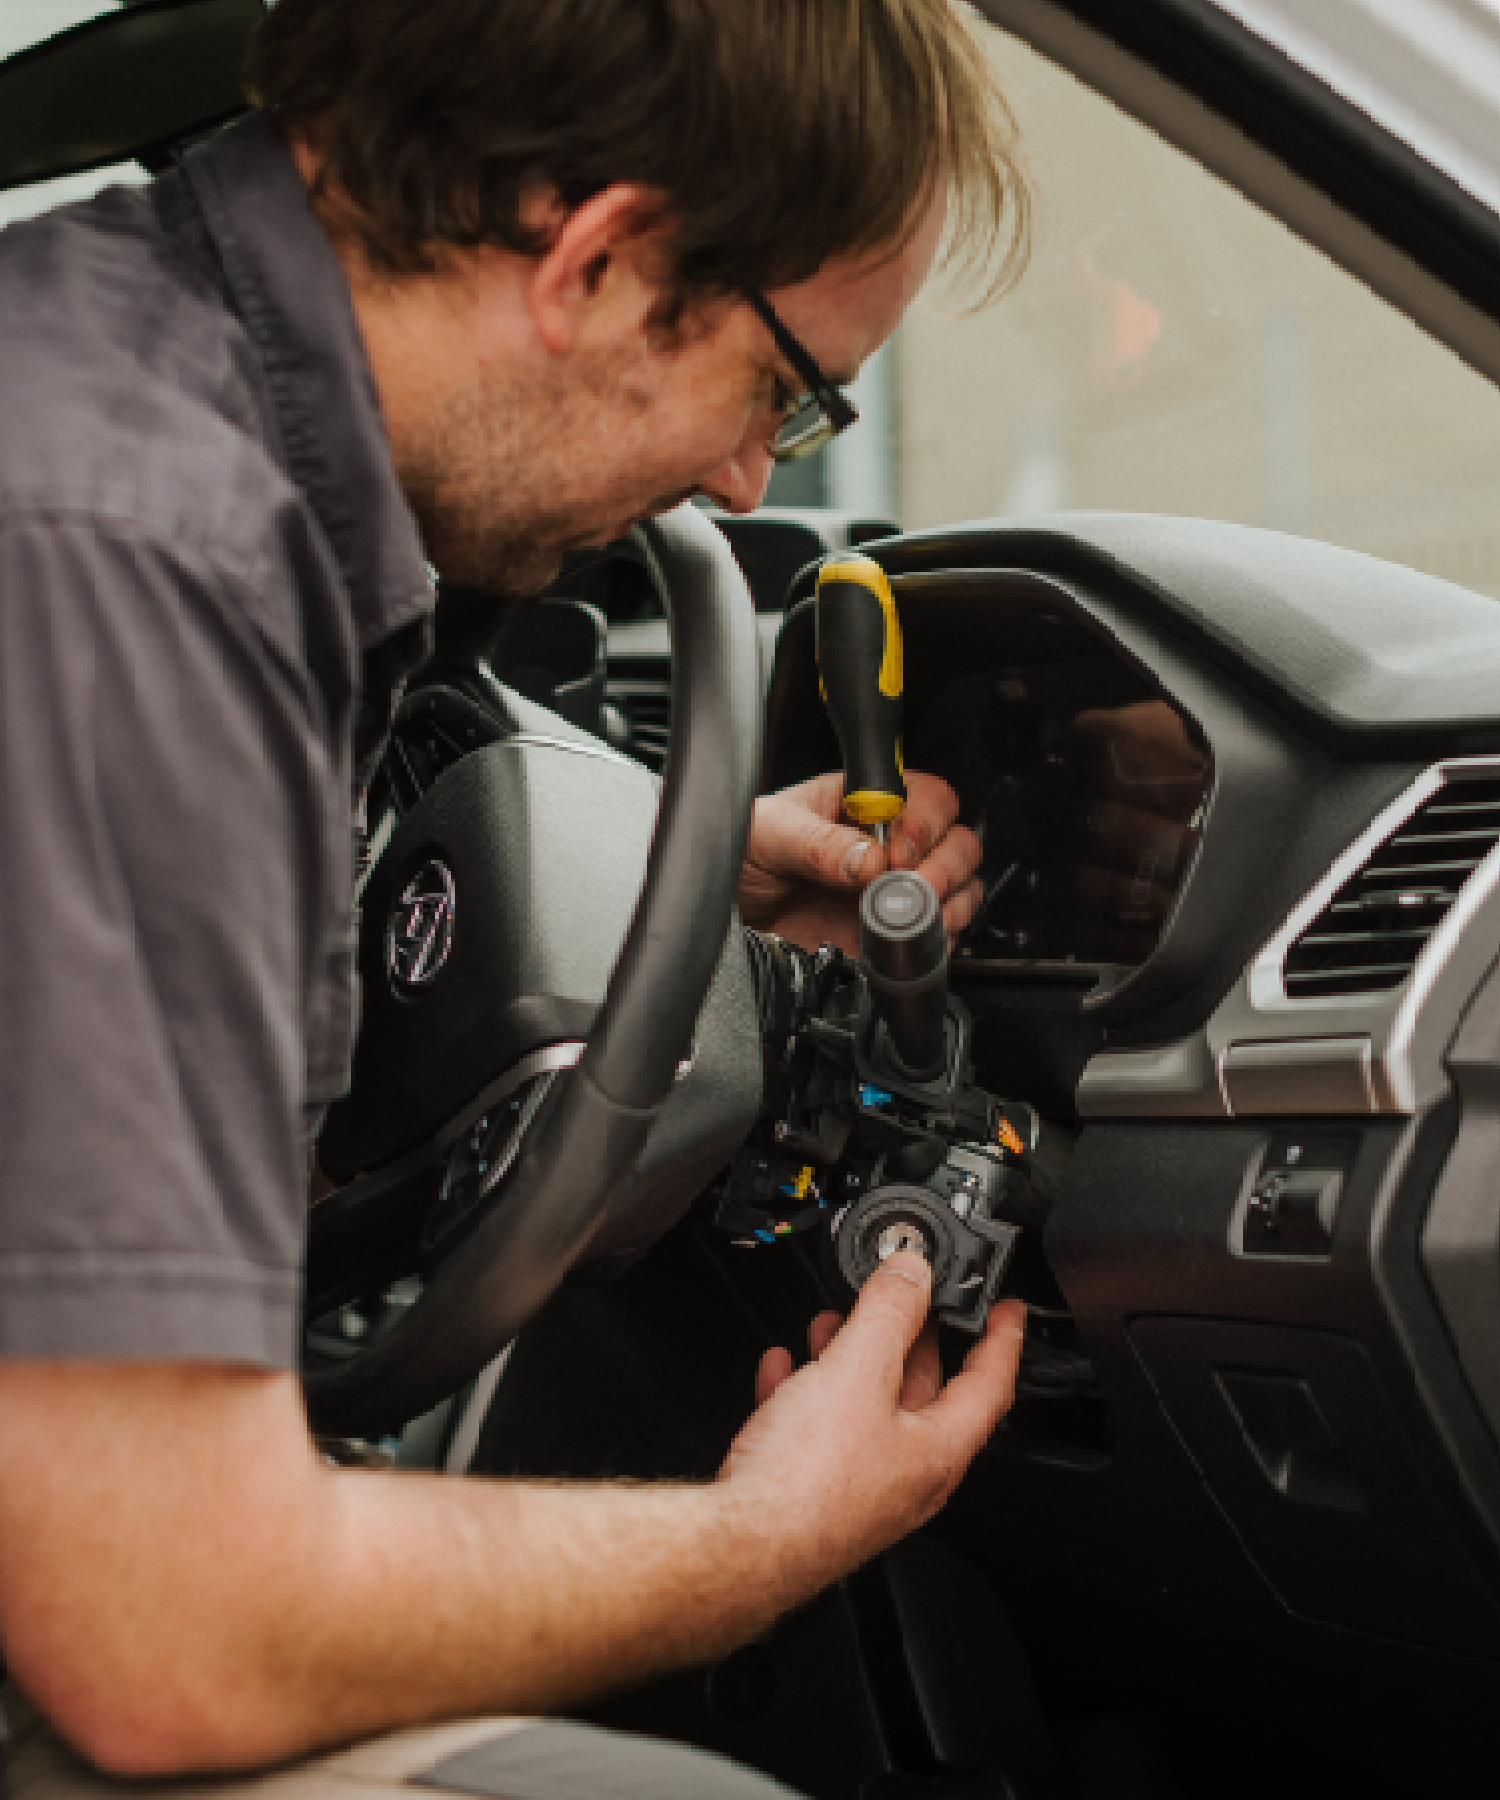 <h1>24hr Emergency Locksmiths</h1><p>Available 24 hours a day, 7 days a week. Call us for any vehicle or building lockouts.</p><button>Contact Us</button>